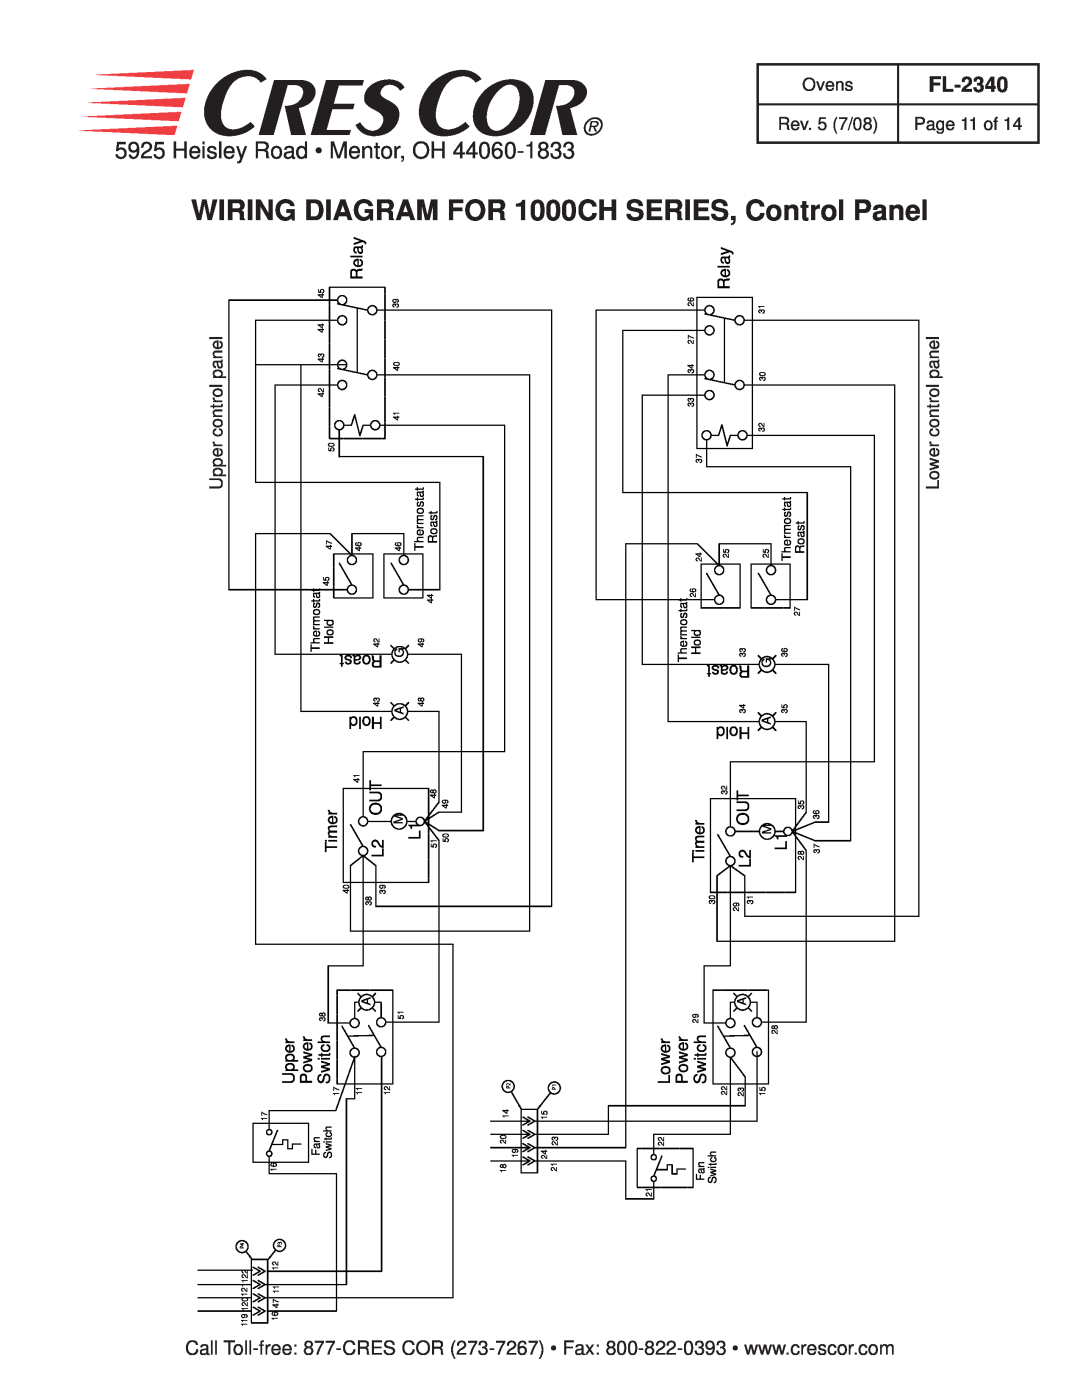 Cres Cor 1000-CH-SS WIRING DIAGRAM FOR 1000CH SERIES, Control Panel, Heisley Road Mentor, OH, FL-2340, Relay, Roast, Hold 